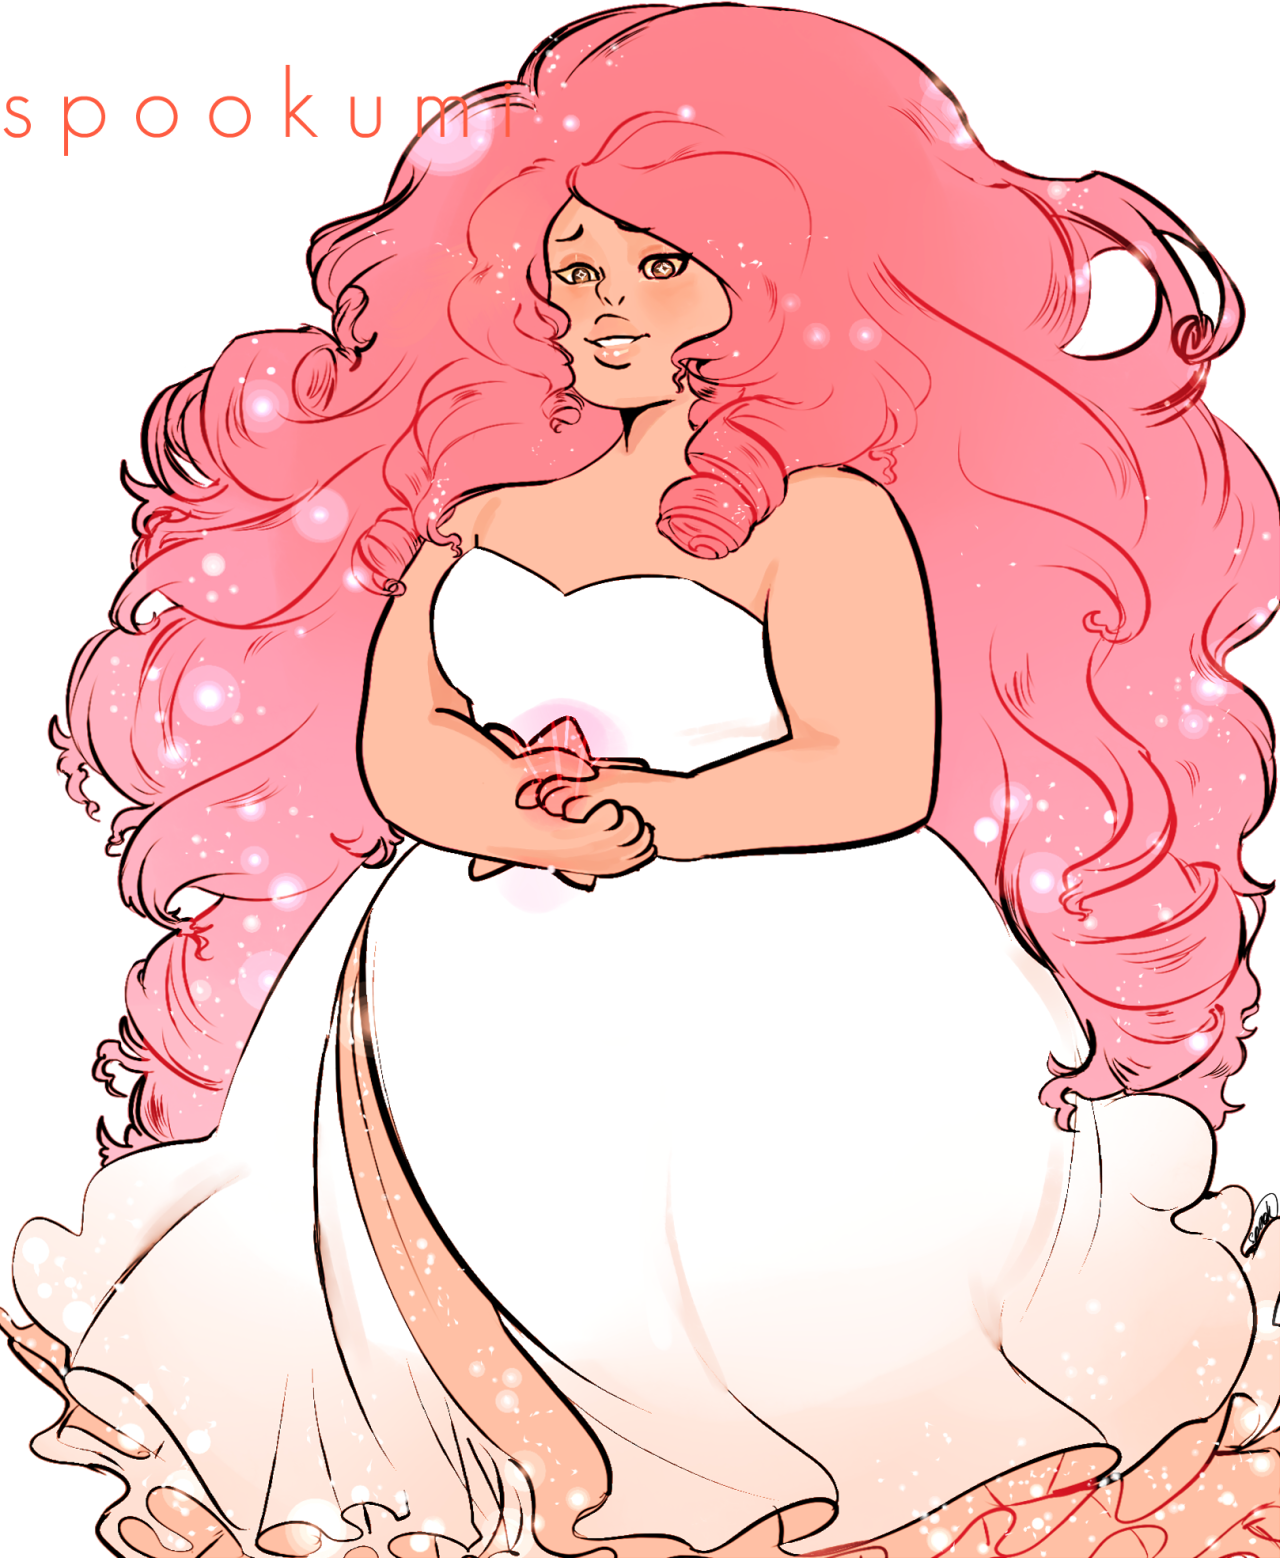 spookumi:  decided to spend the last couple hours redrawing an old rose quartz drawing